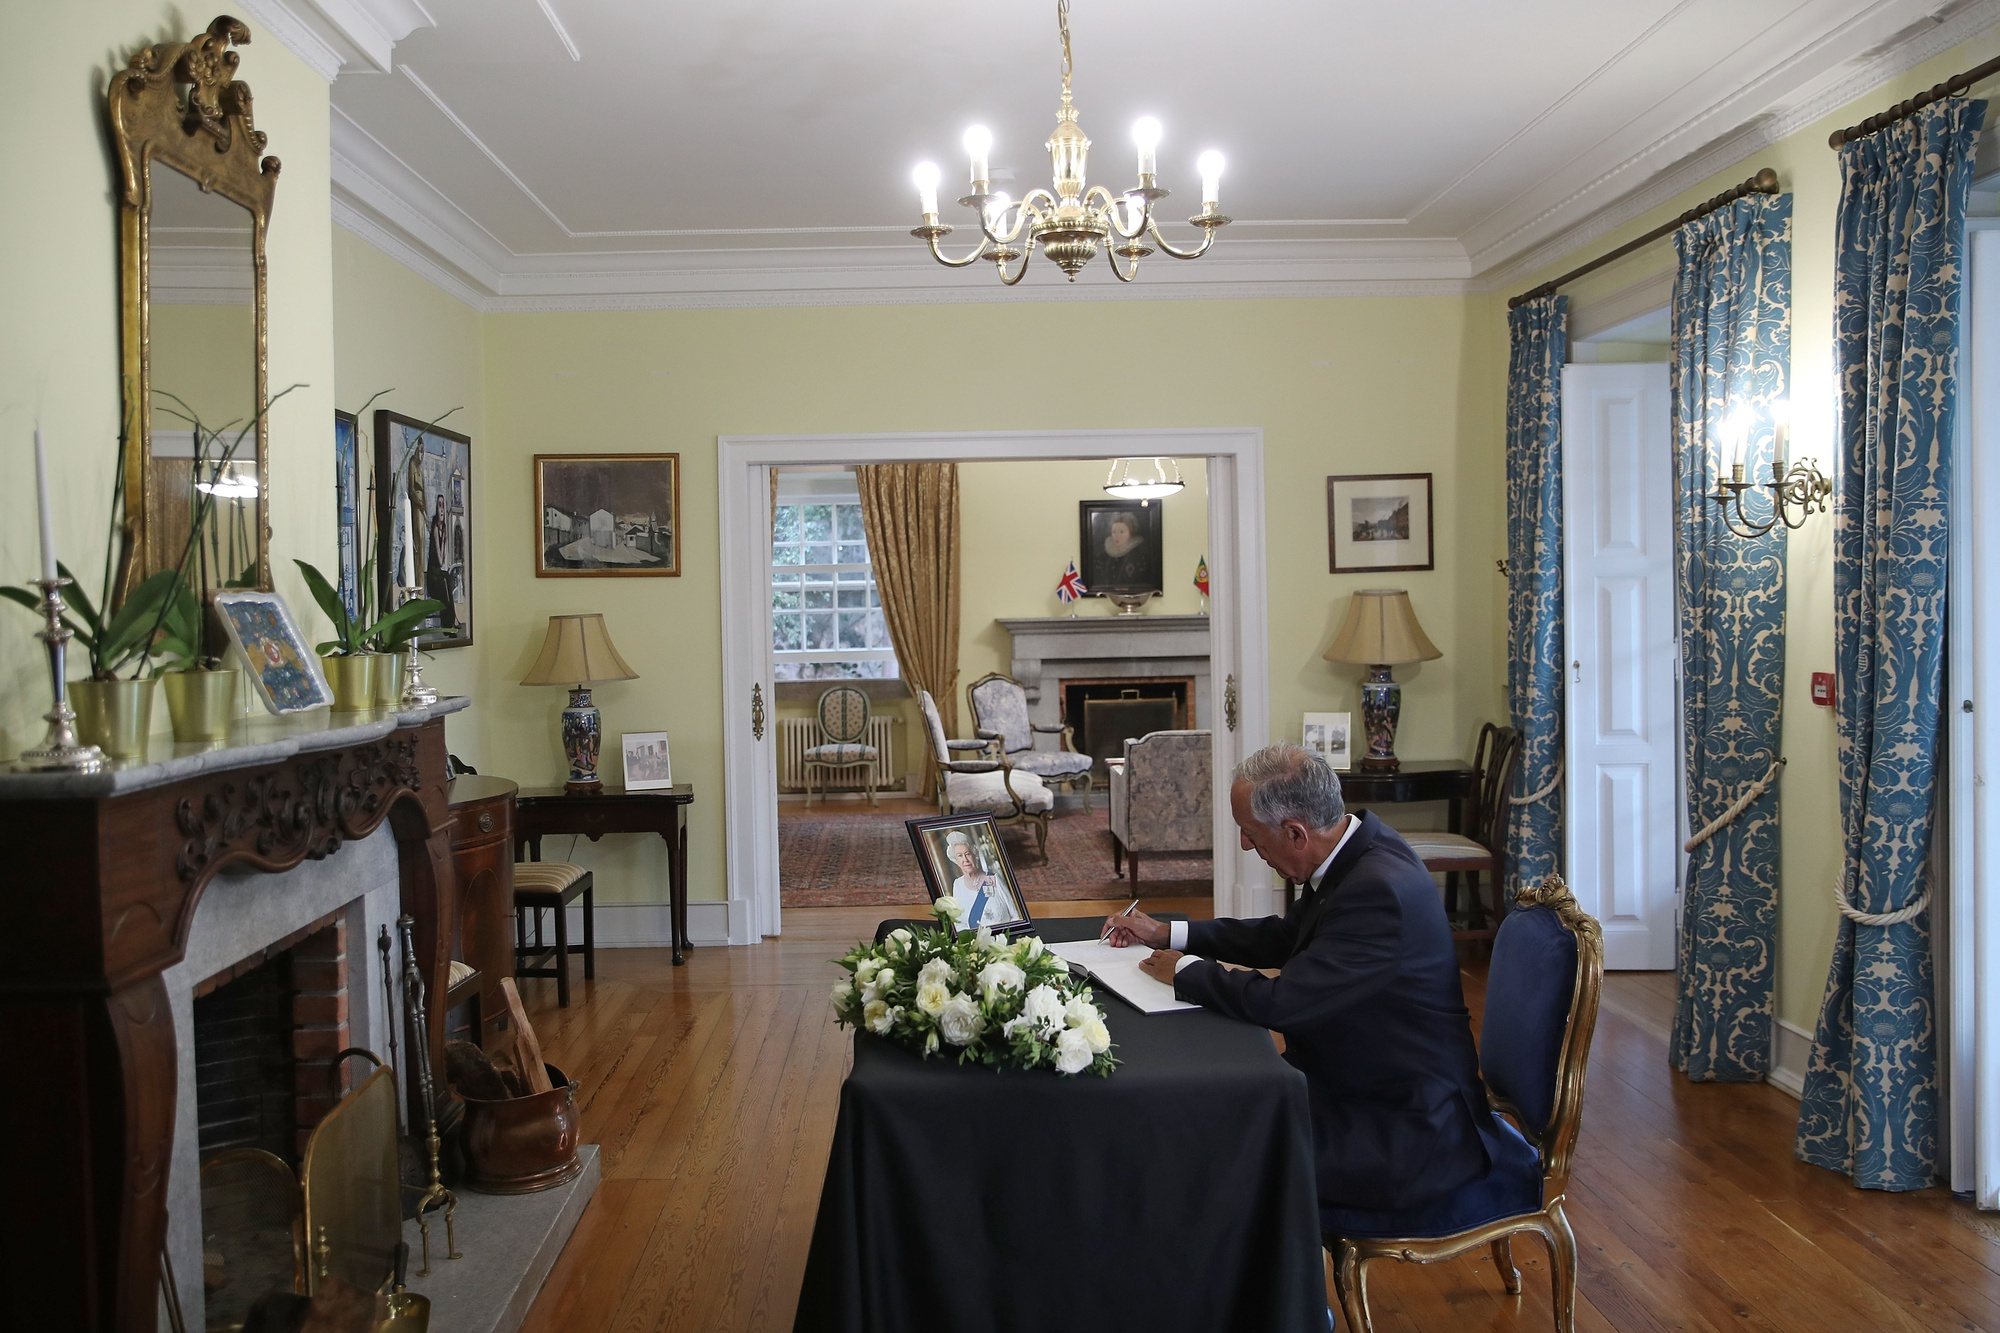 The President of Portugal Marcelo Rebelo de Sousa paying respects as he signs a condolence book for the Britain&#039;s late Queen Elizabeth II, at the British embassy in Lisbon, Portugal, 10 September 2022. Britain&#039;s Queen Elizabeth II died at her Scottish estate on 08 September 2022. The 96-year-old Queen was the longest-reigning monarch in British history. ANTONIO PEDRO SANTOS/LUSA